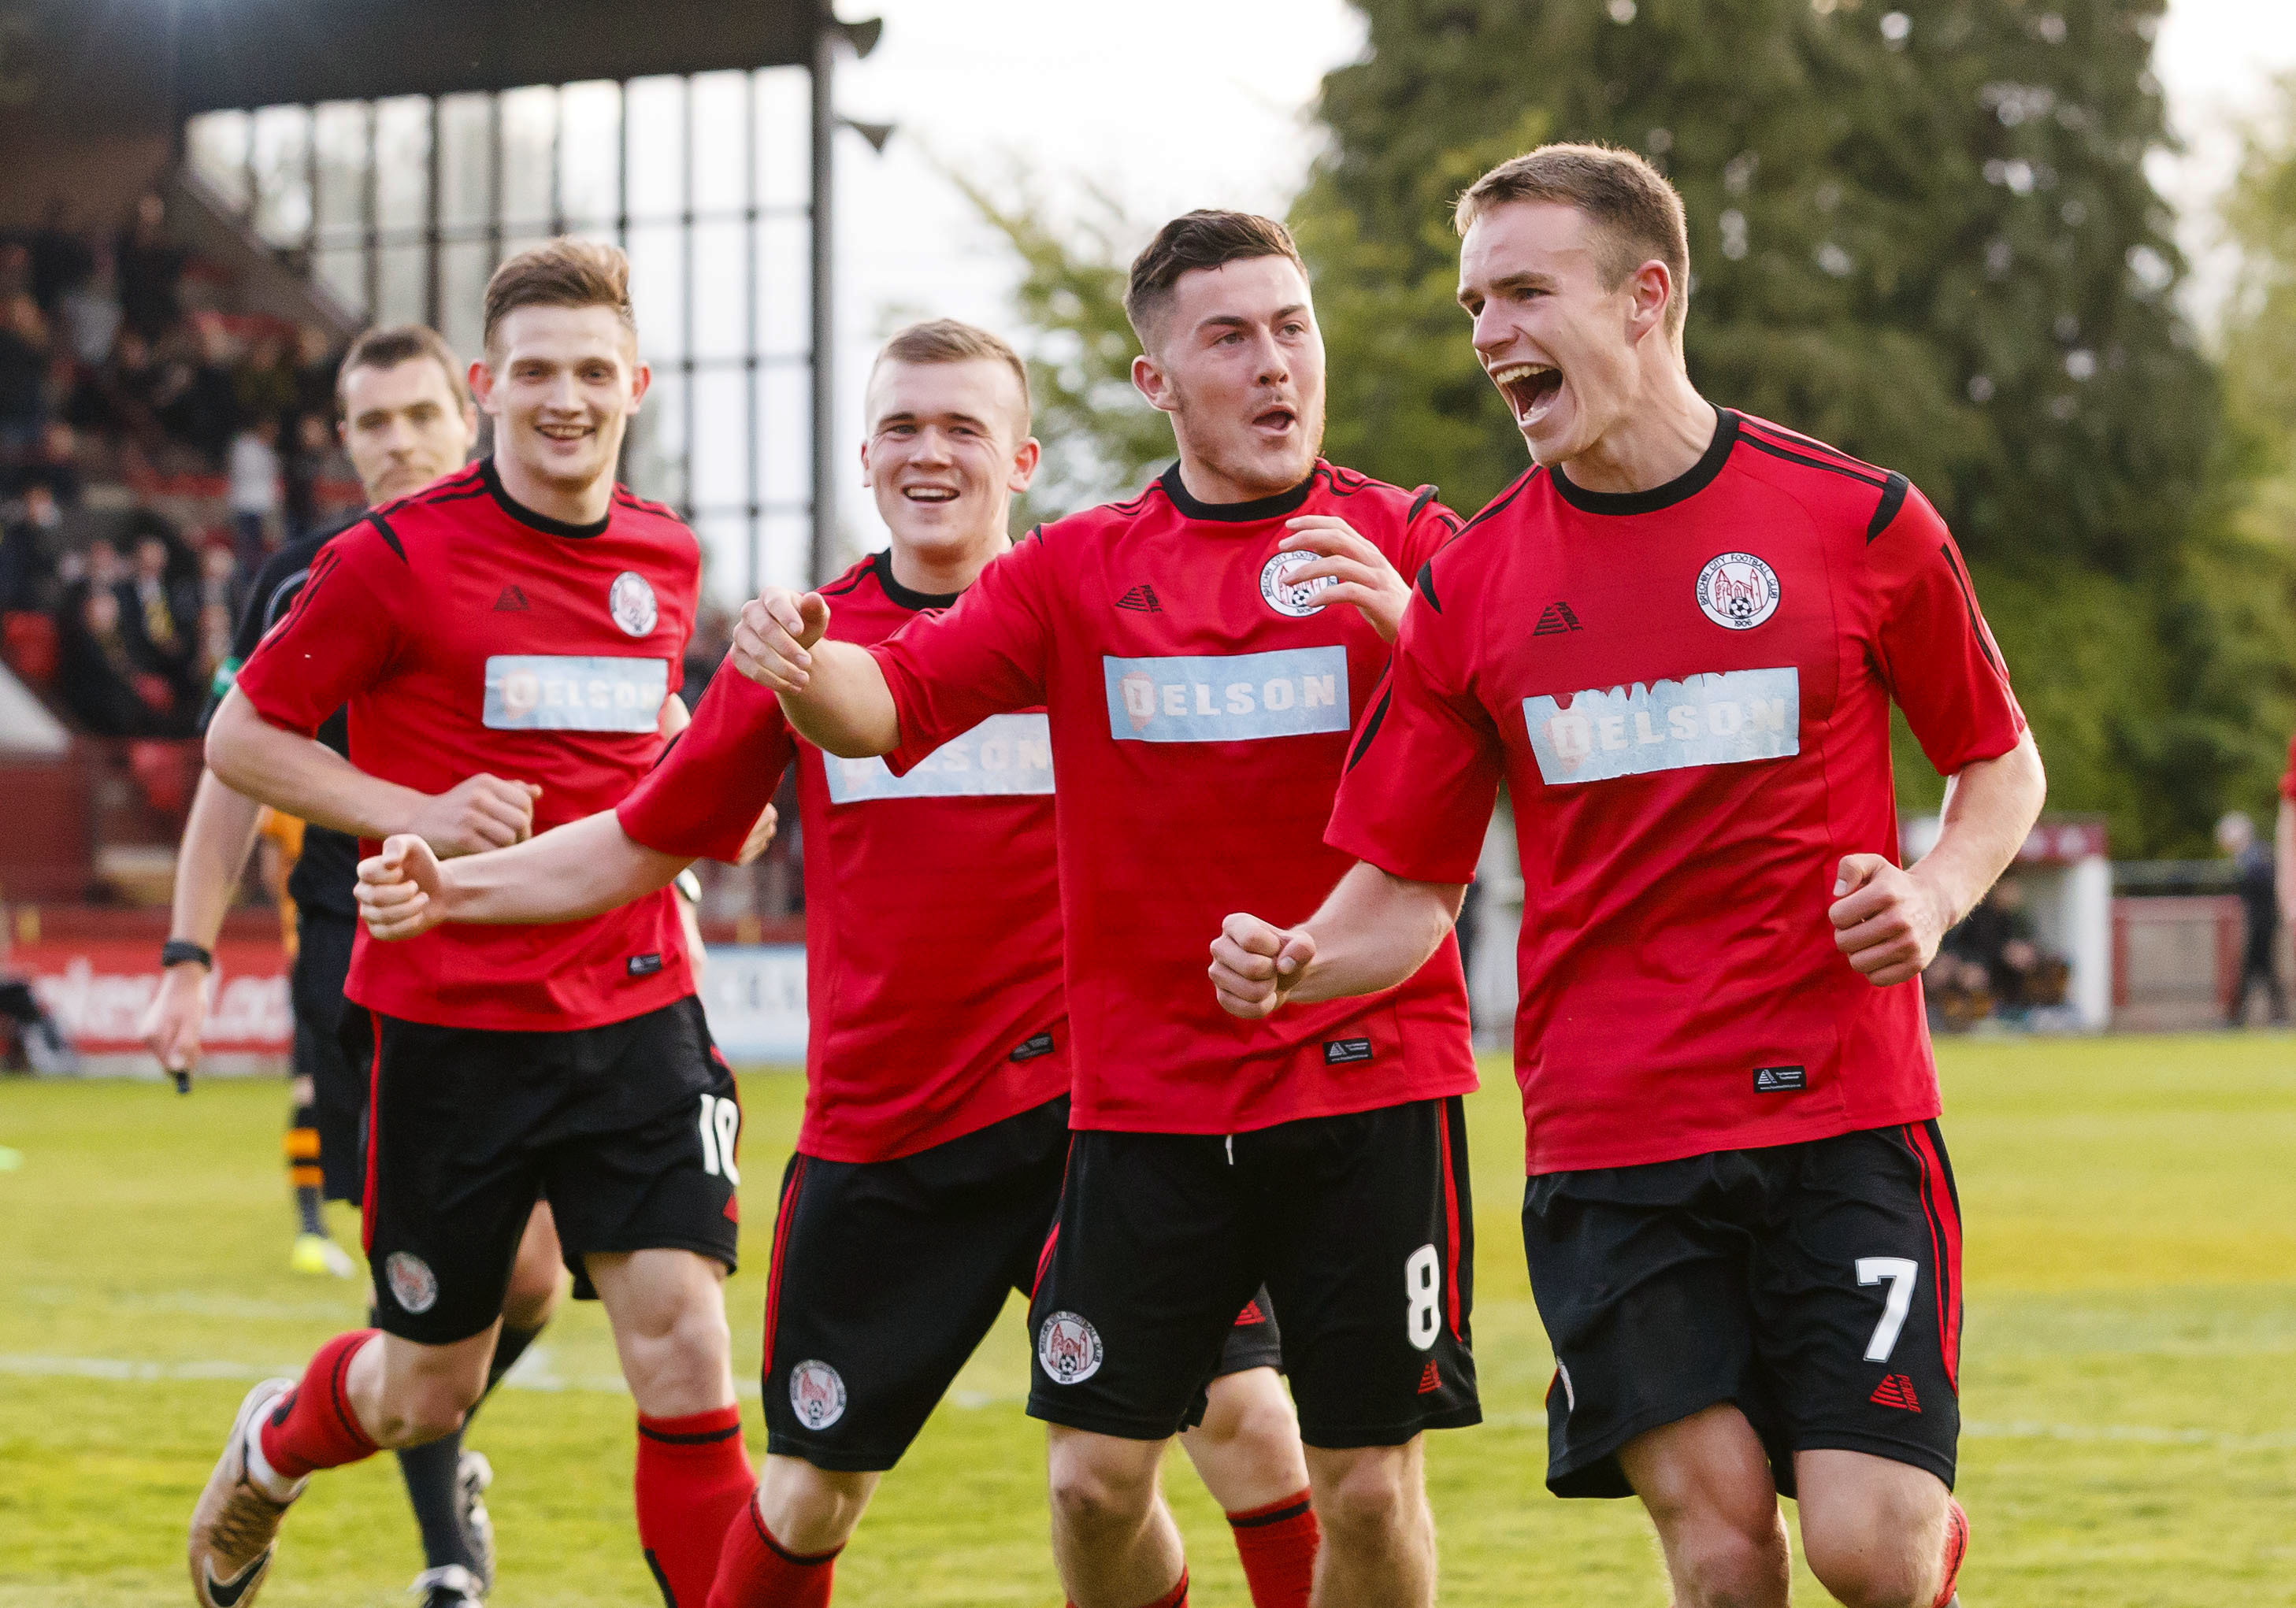 Brechin's Elliot Ford (right) celebrates scoring the only goal.